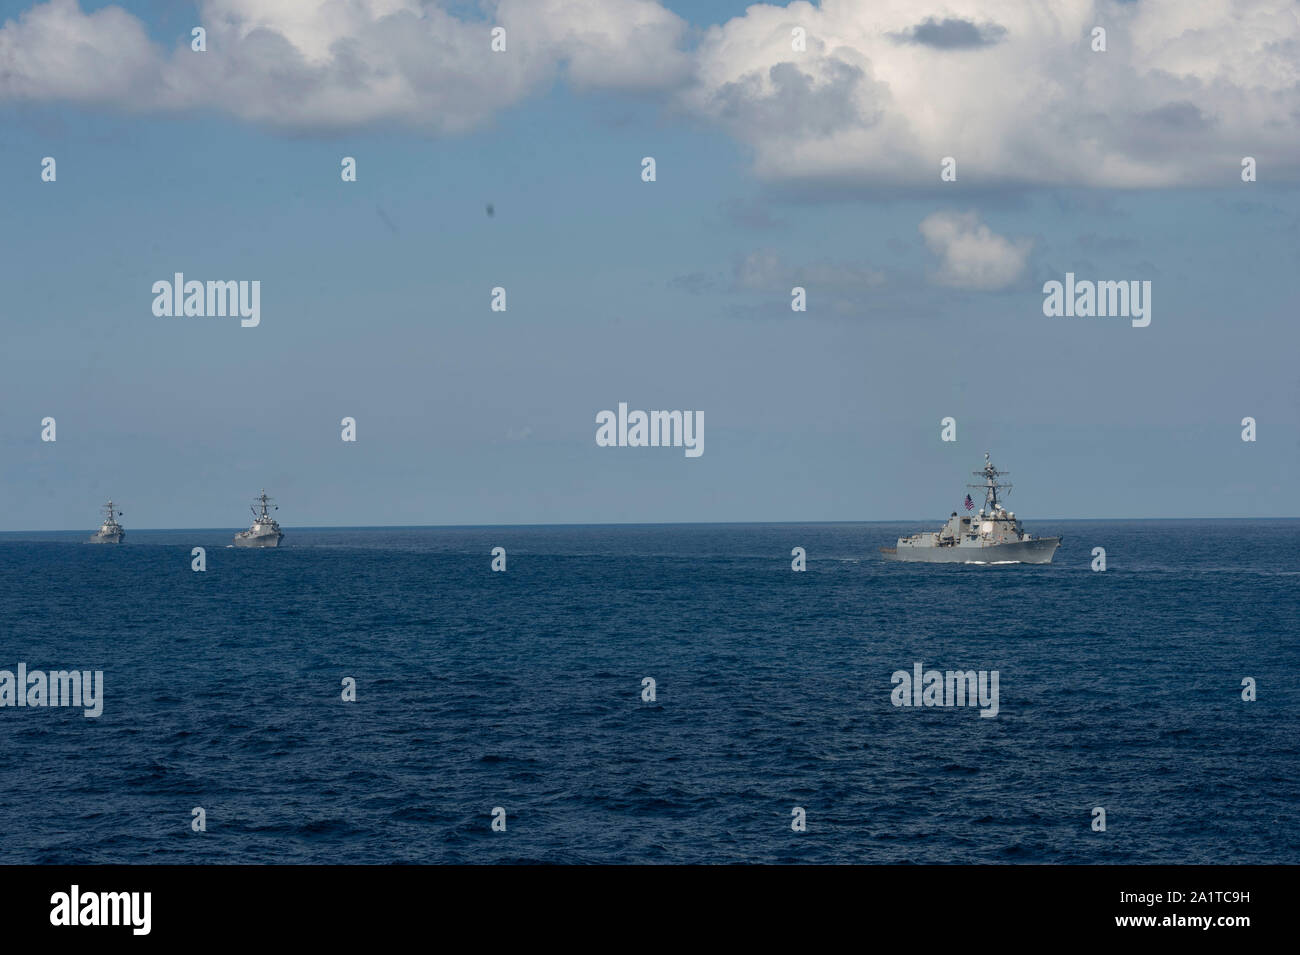 190928-N-PI330-0267 ATLANTIC OCEAN (Sept. 28, 2019) The Arleigh-Burke-class guided-missile destroyers USS James E. Williams (DDG 95), USS Stout (DDG 55) and USS Truxtun (DDG 103) move in formation. Carrier Strike Group 10 is underway conducting normal operations. (U.S. Navy Photo by Mass Communication Specialist 3rd Class Andrew Waters/Released) Stock Photo